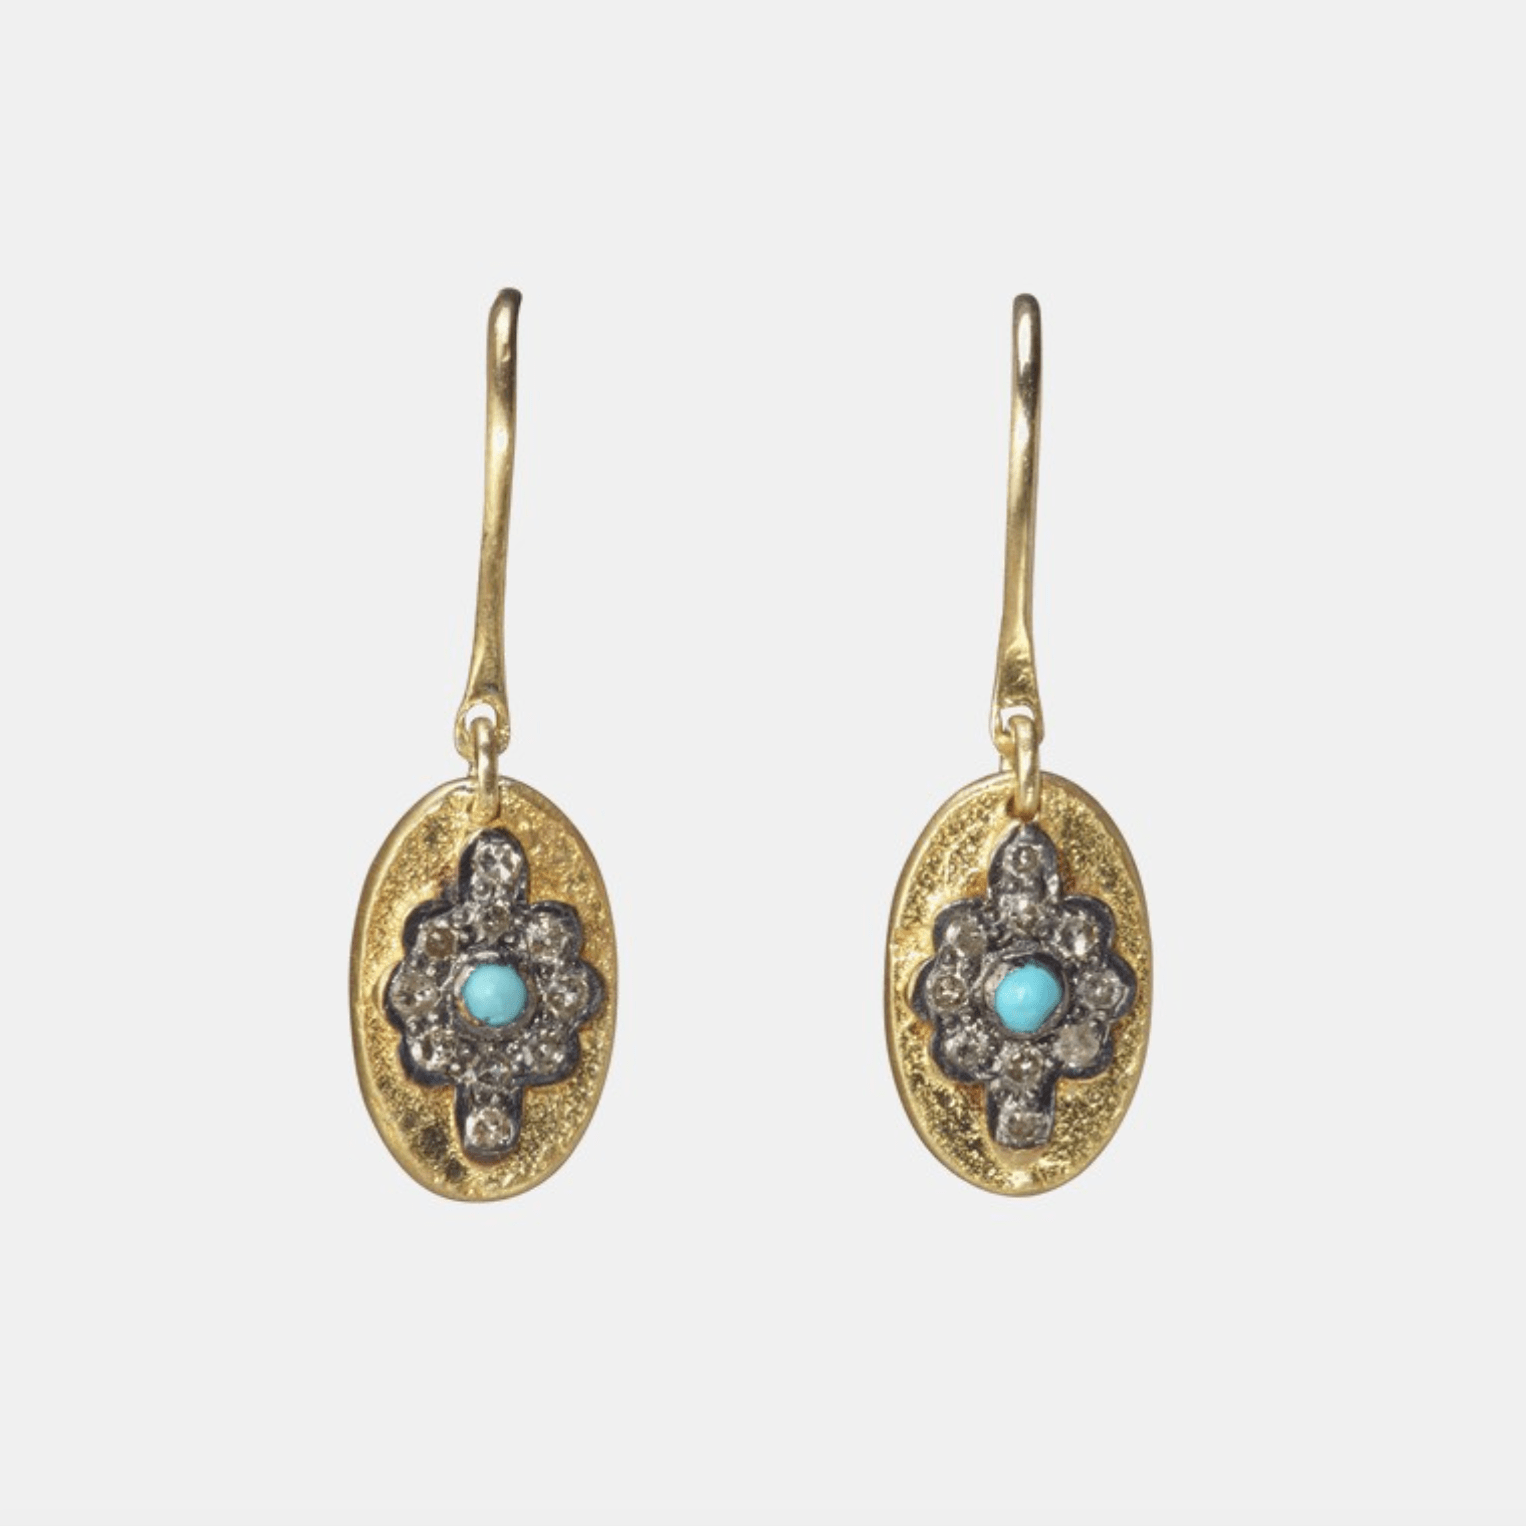 5 Octobre Jewelry Turquoise Liby Earrings